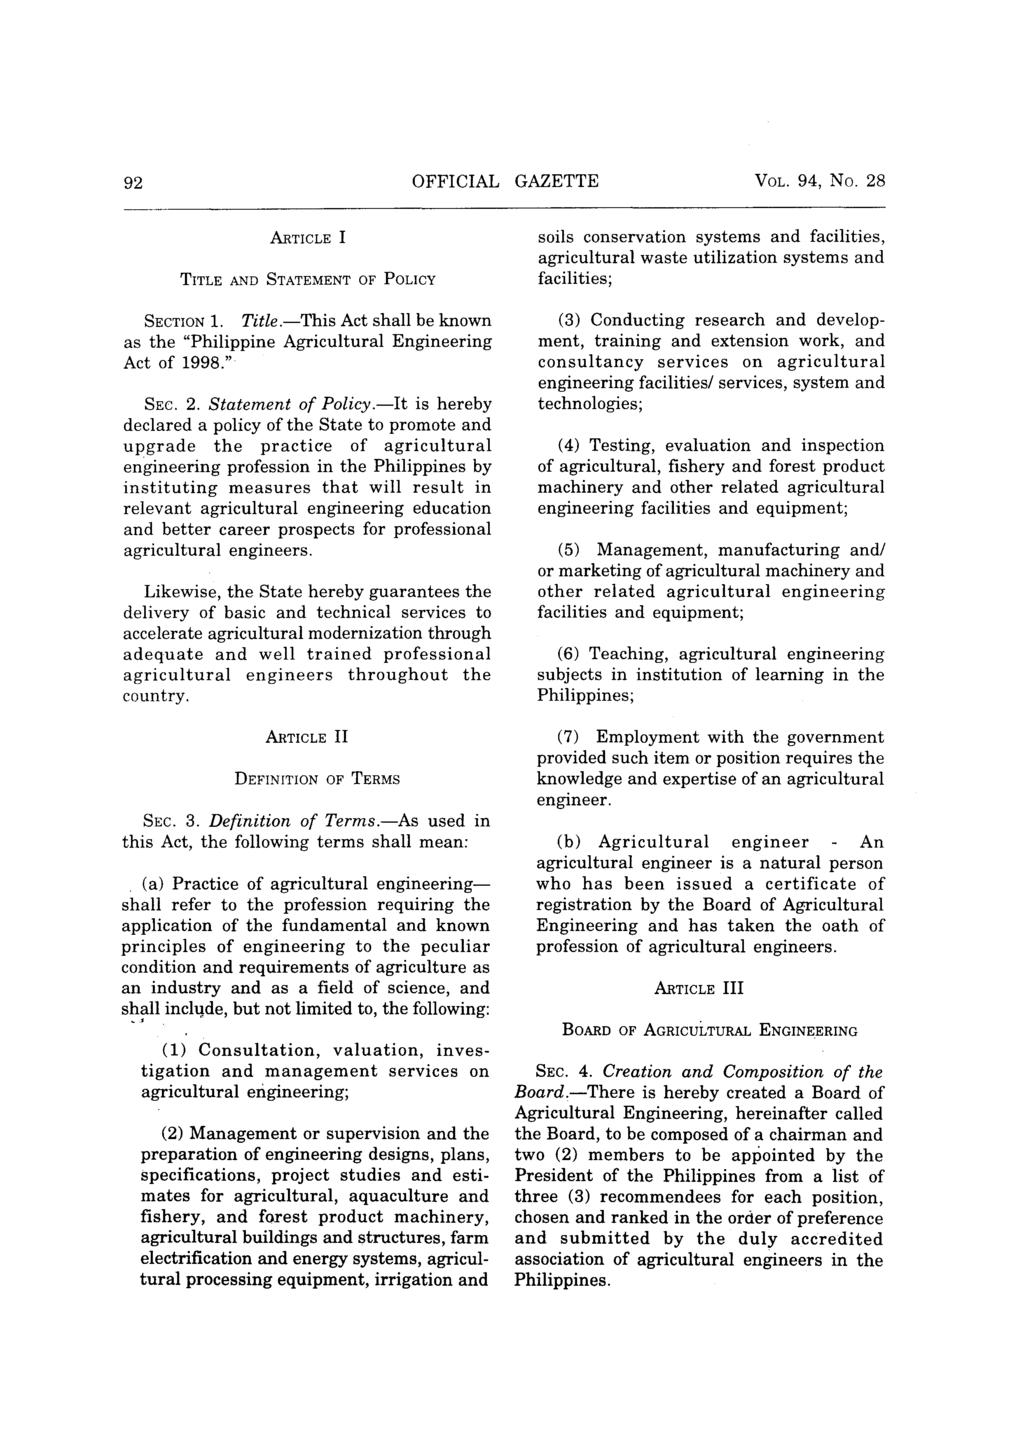 92 OFFICIAL GAZETTE VOL. 94, No. 28 ARTICLE I TITLE AND STATEMENT OF POLICY SECTION 1. Title.-This Act shall be known as the "Philippine Agricultural Engineering Act of 1998." SEC. 2. Statement of Policy.